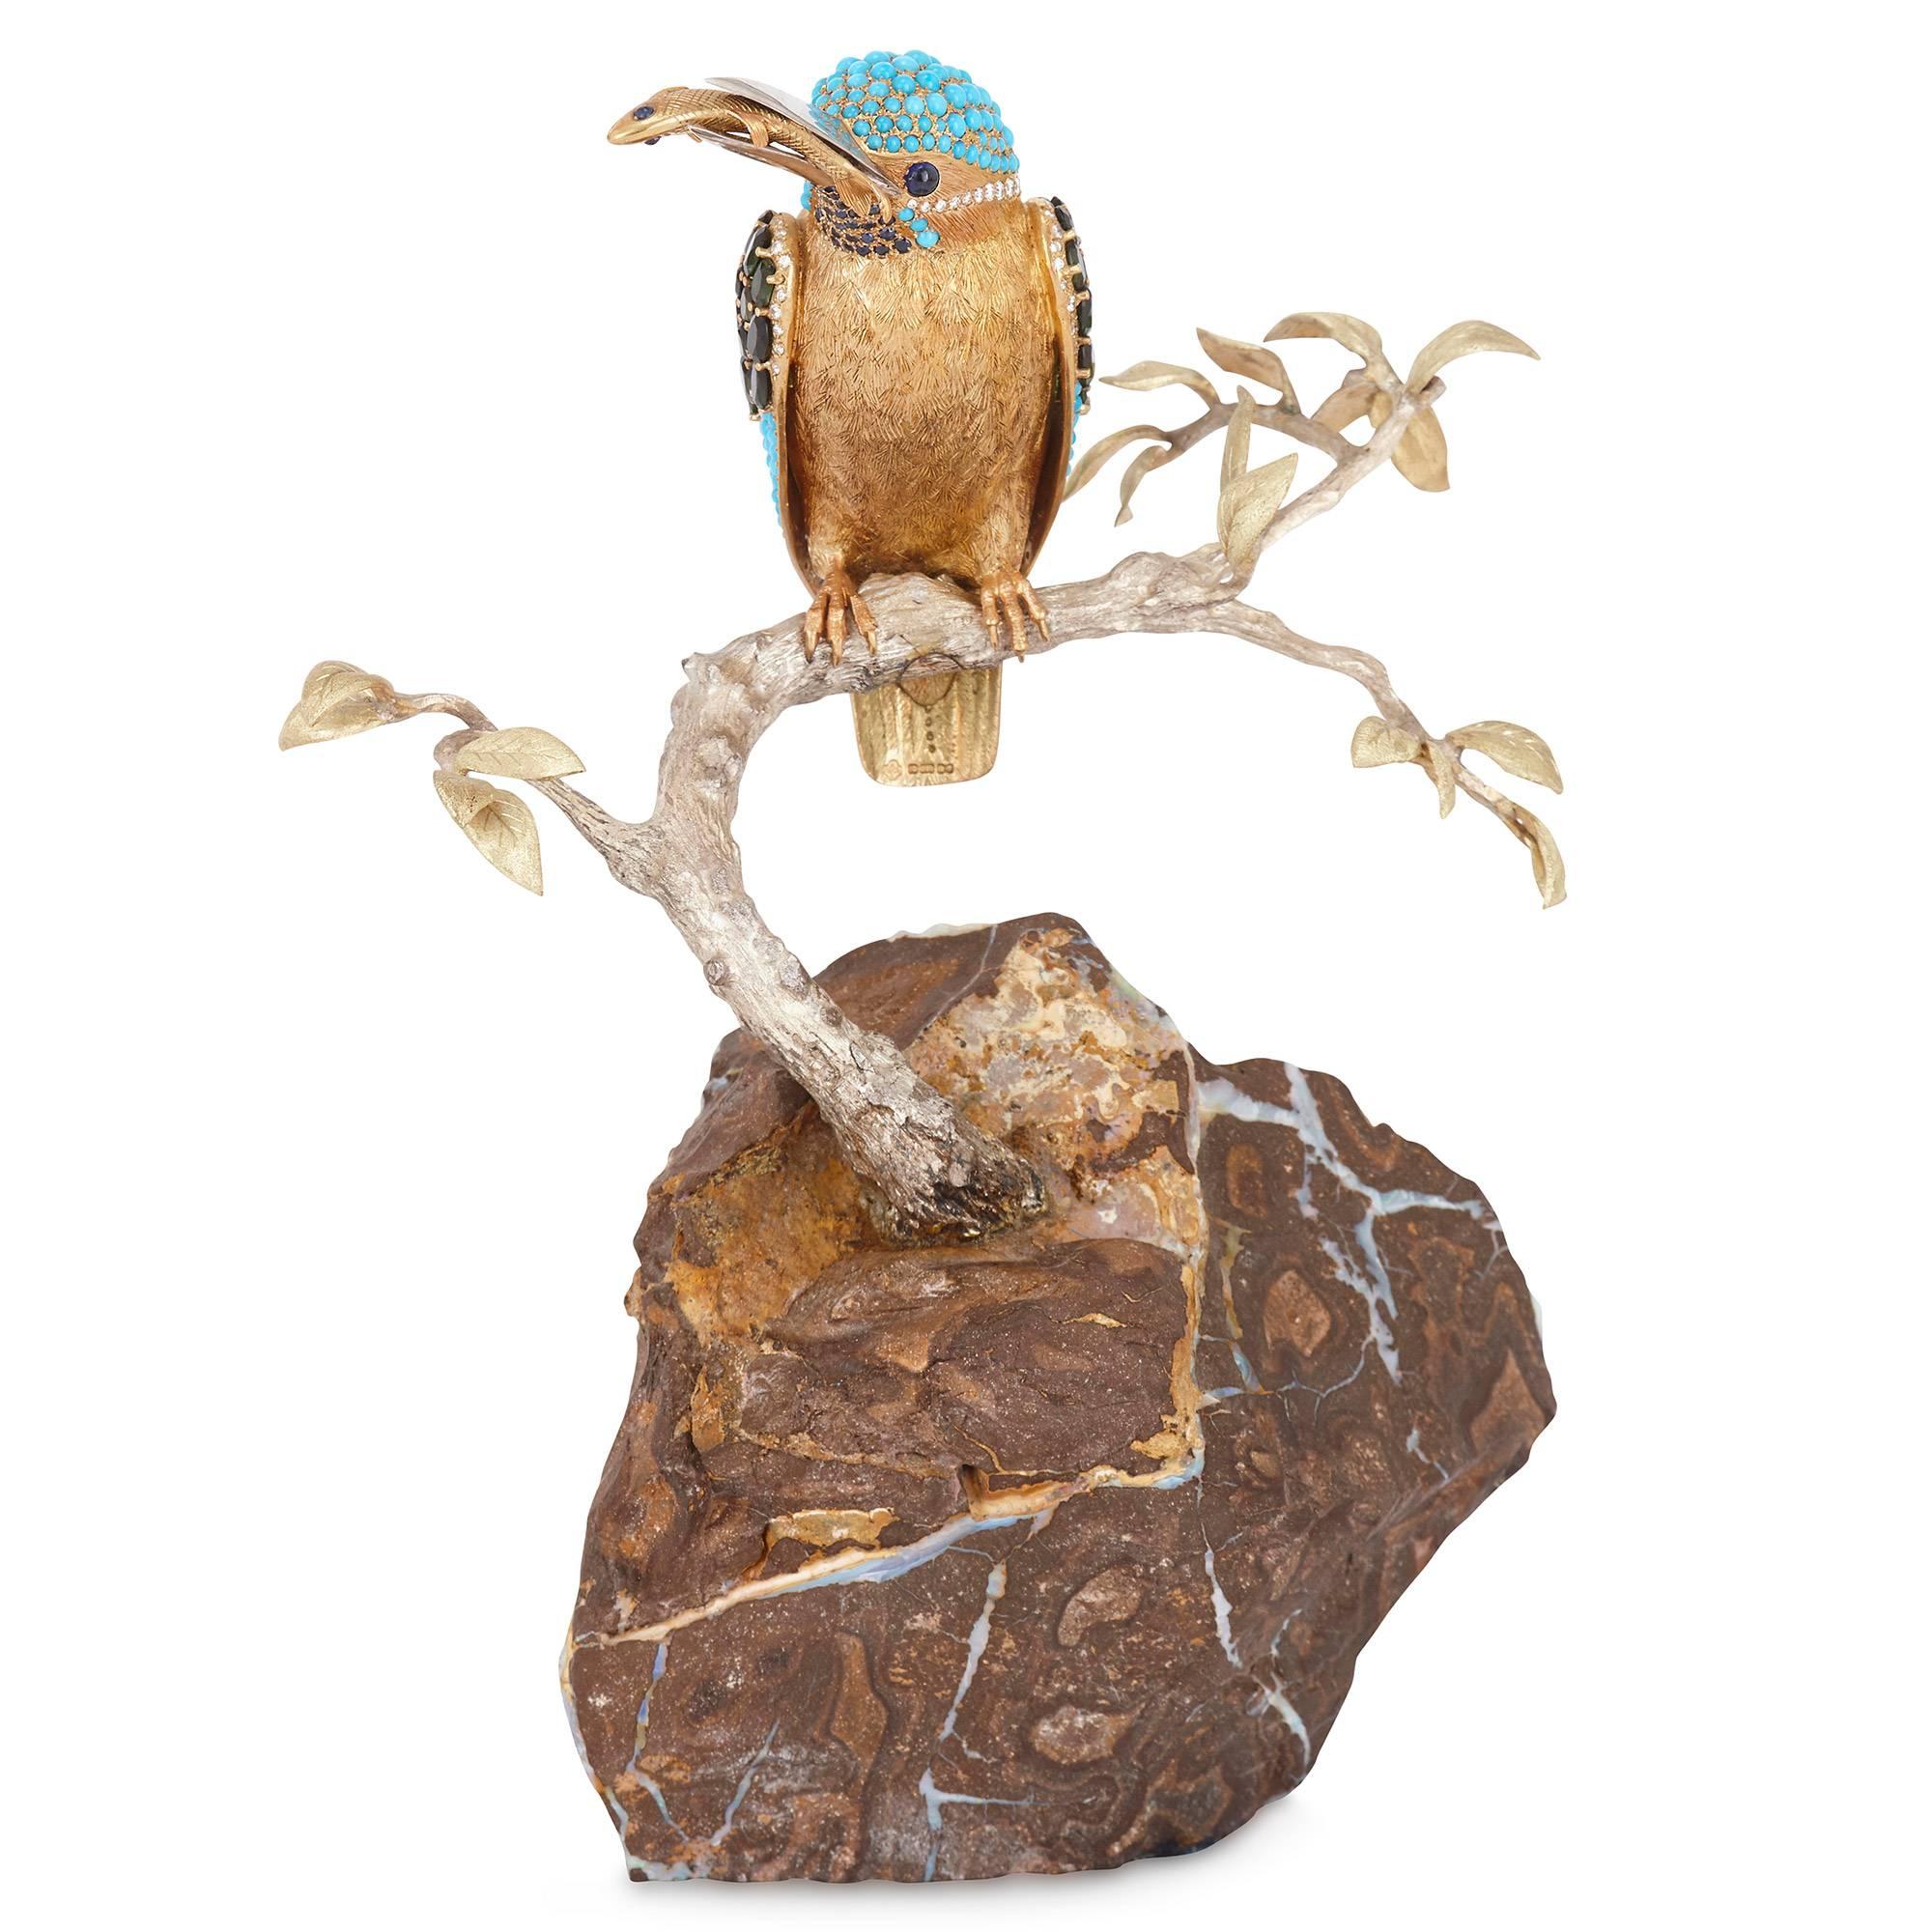 Beautiful gold model of a kingfisher set with precious gemstones including sapphires, diamonds, turquoises and peridots, all set on an opal boulder base. The gold bird is perching on a tree branch, holding a gold fish in its beak. The underside of